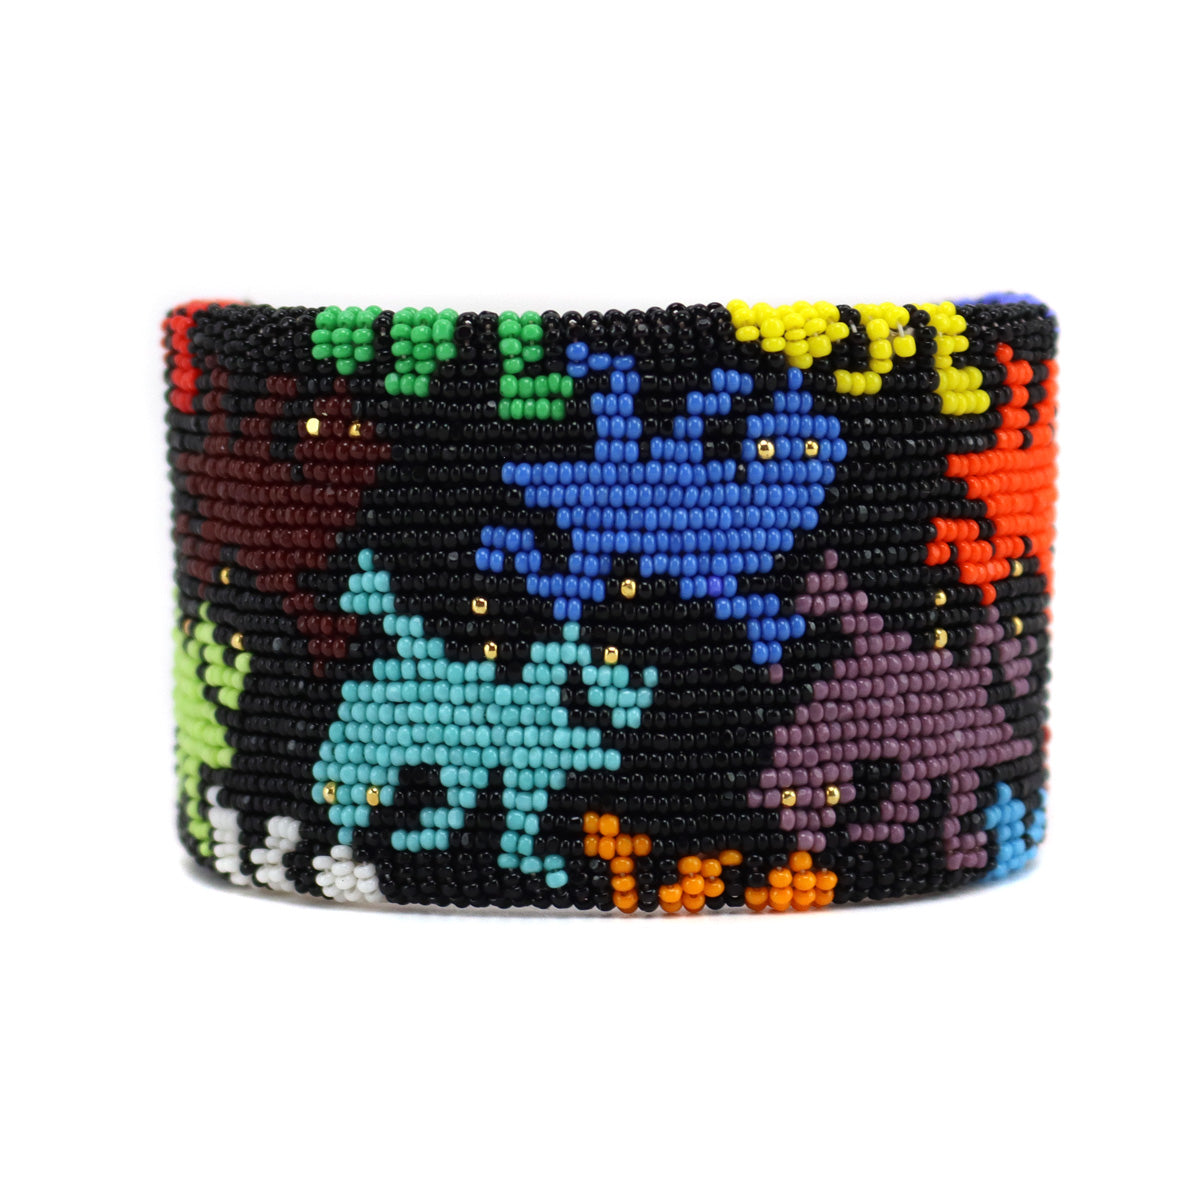 Marcus Amerman - Choctaw - Beaded Leather Bracelet with Lizard Pictorials c. 1990s, size 6 (J16064-027)